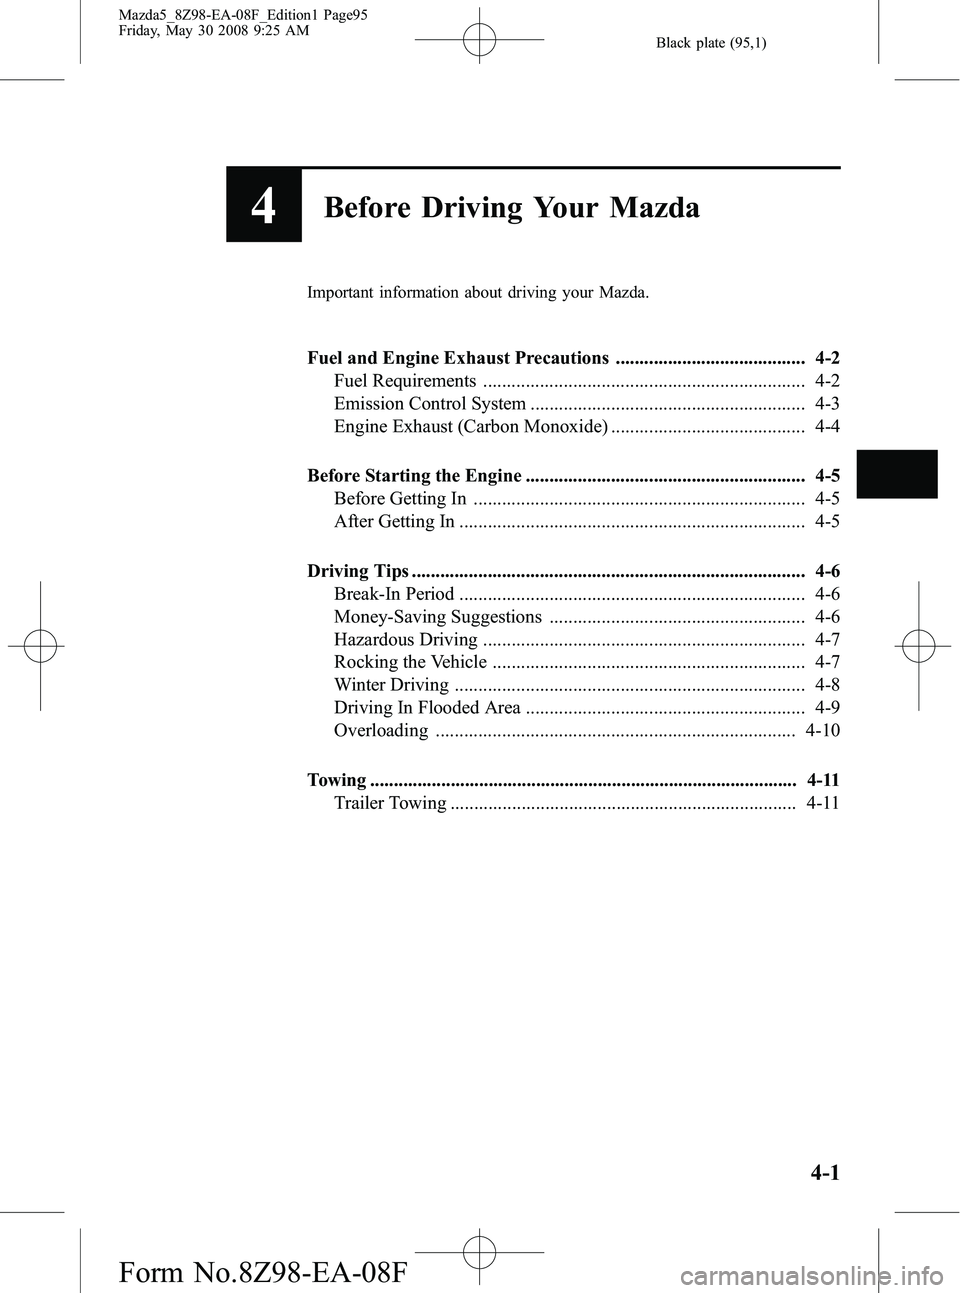 MAZDA MODEL 5 2009  Owners Manual Black plate (95,1)
4Before Driving Your Mazda
Important information about driving your Mazda.
Fuel and Engine Exhaust Precautions ........................................ 4-2Fuel Requirements ........